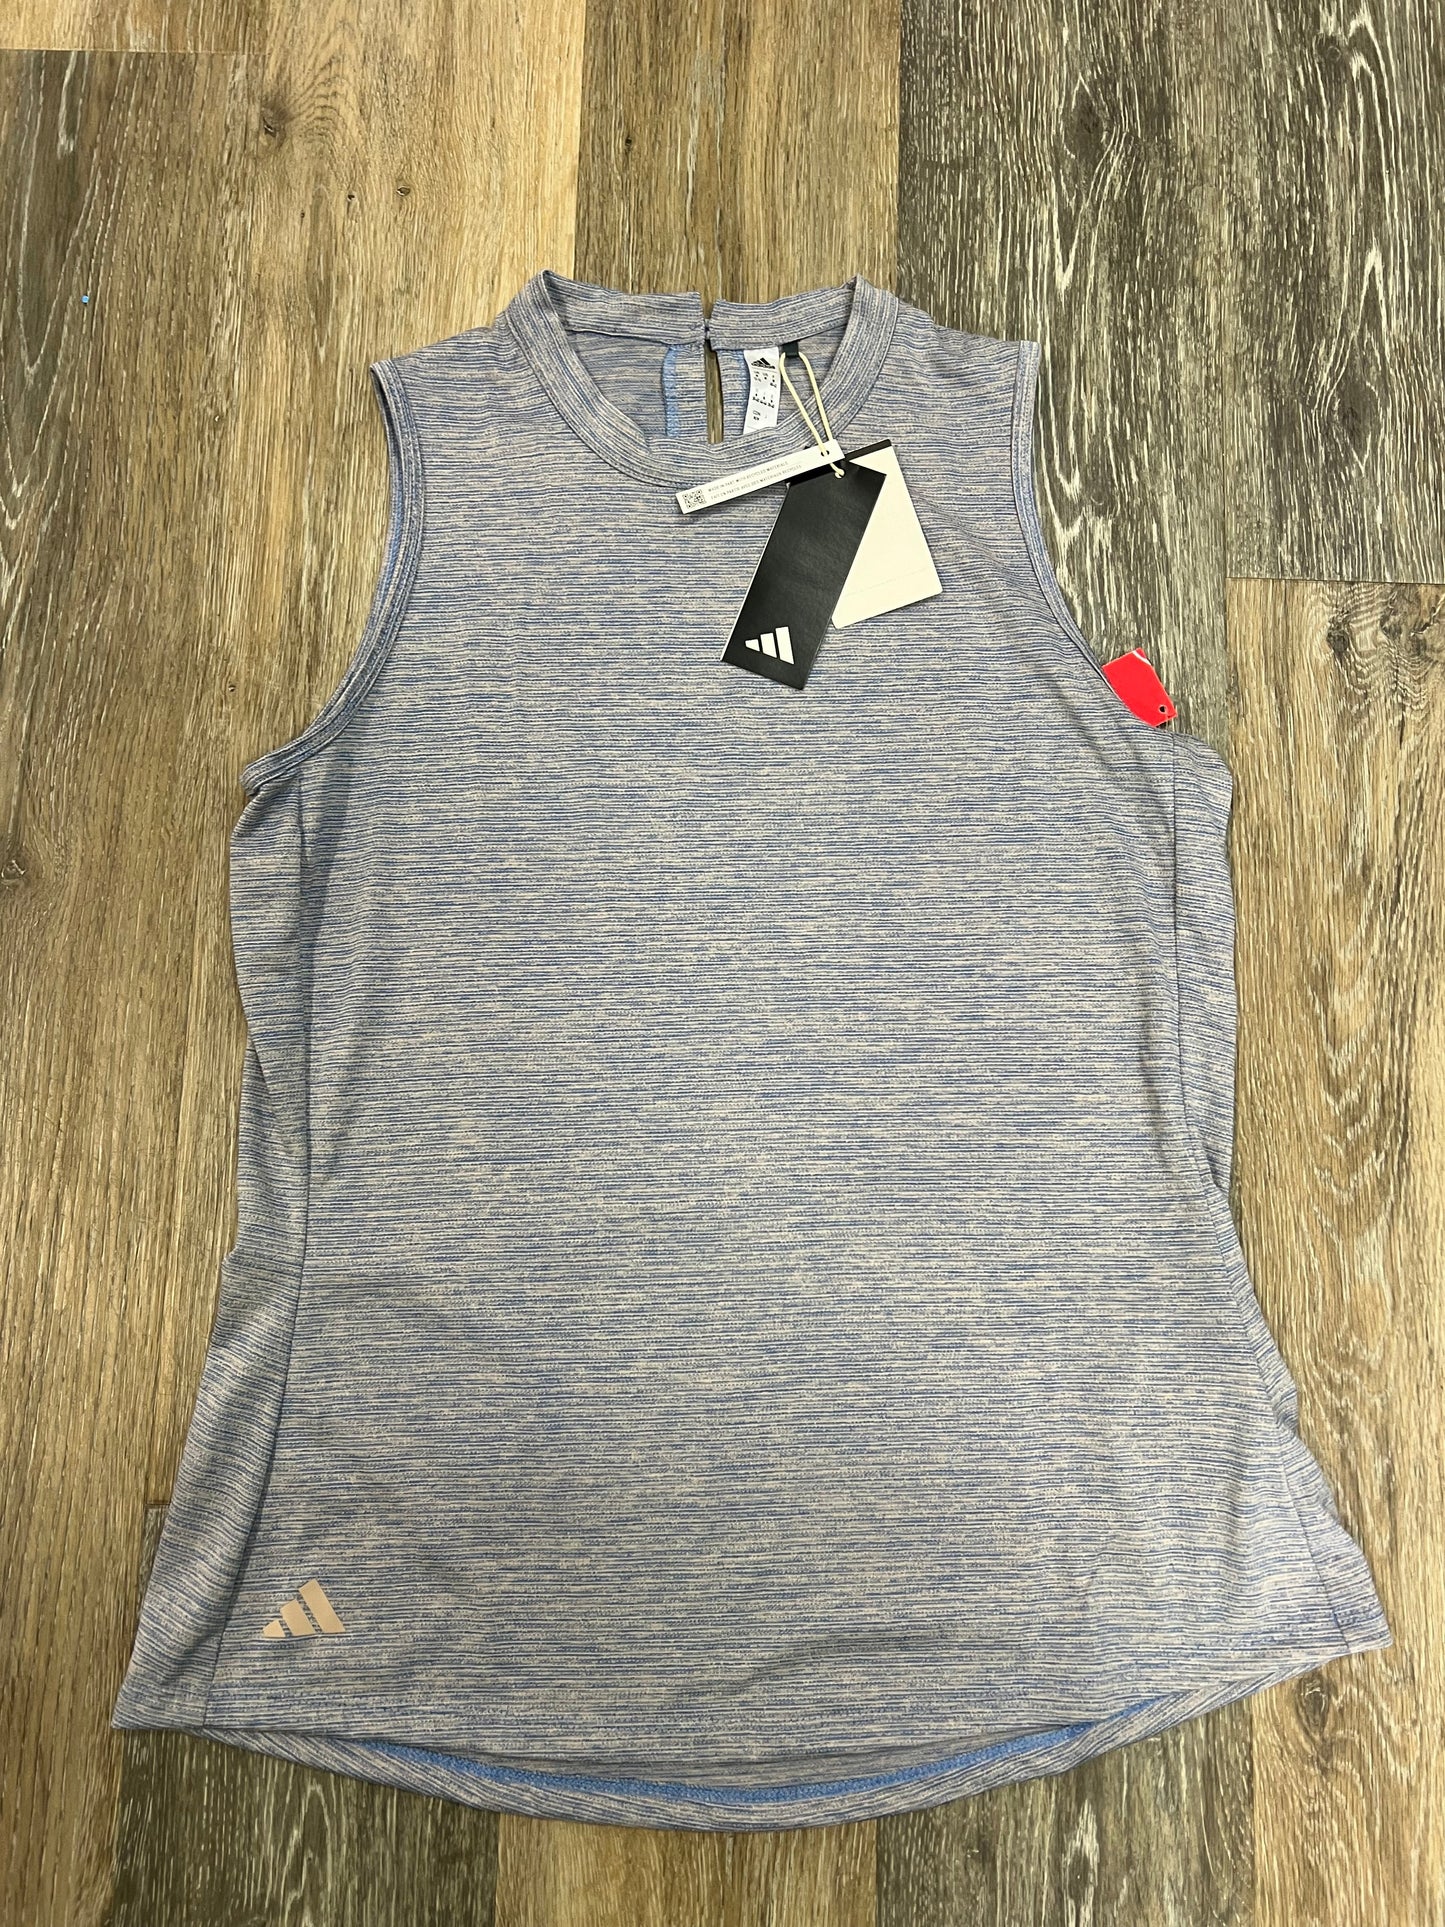 Blue Athletic Tank Top Adidas, Size M